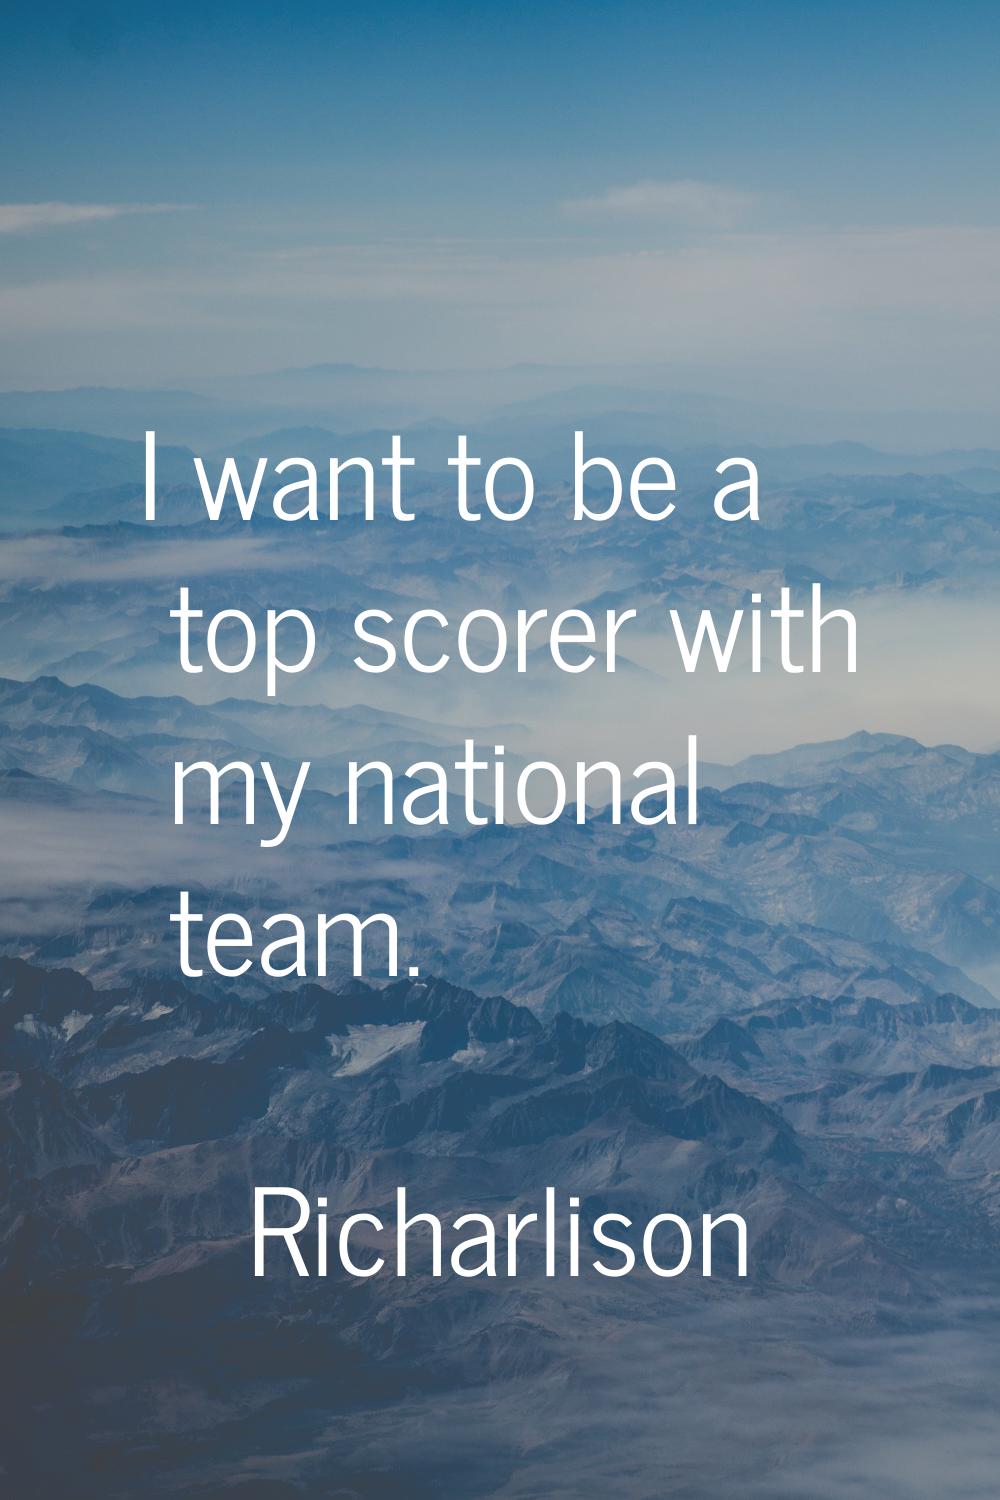 I want to be a top scorer with my national team.